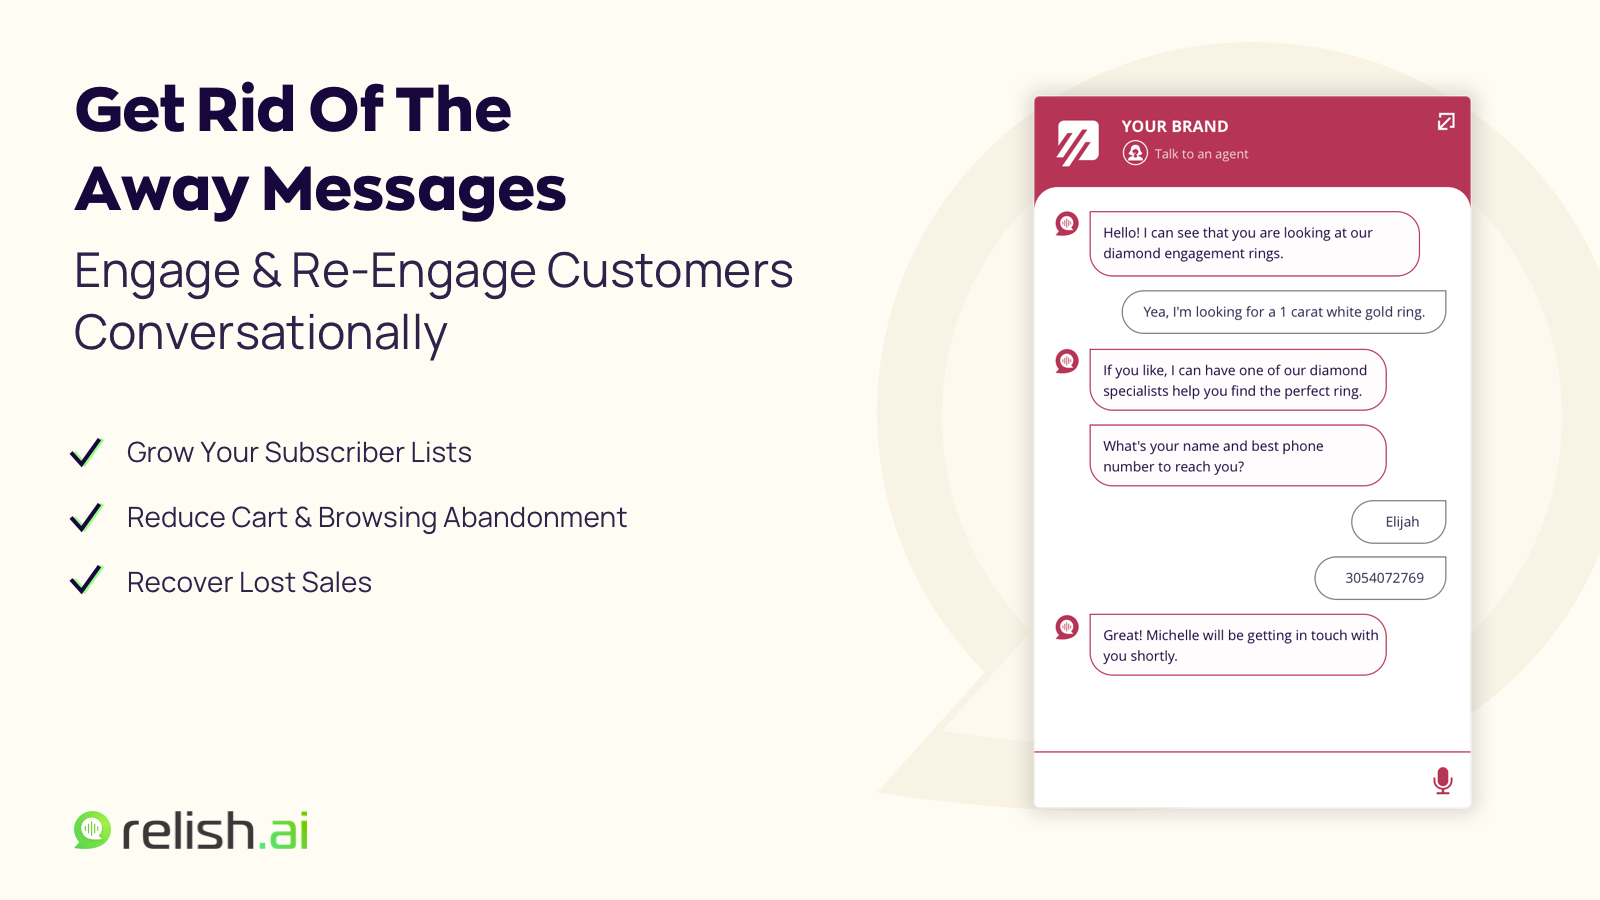 Engage For More Sales - Conversationally recover abandoned carts, exit intents, newsletter sign-ups, back in stock notifications, and capture leads.